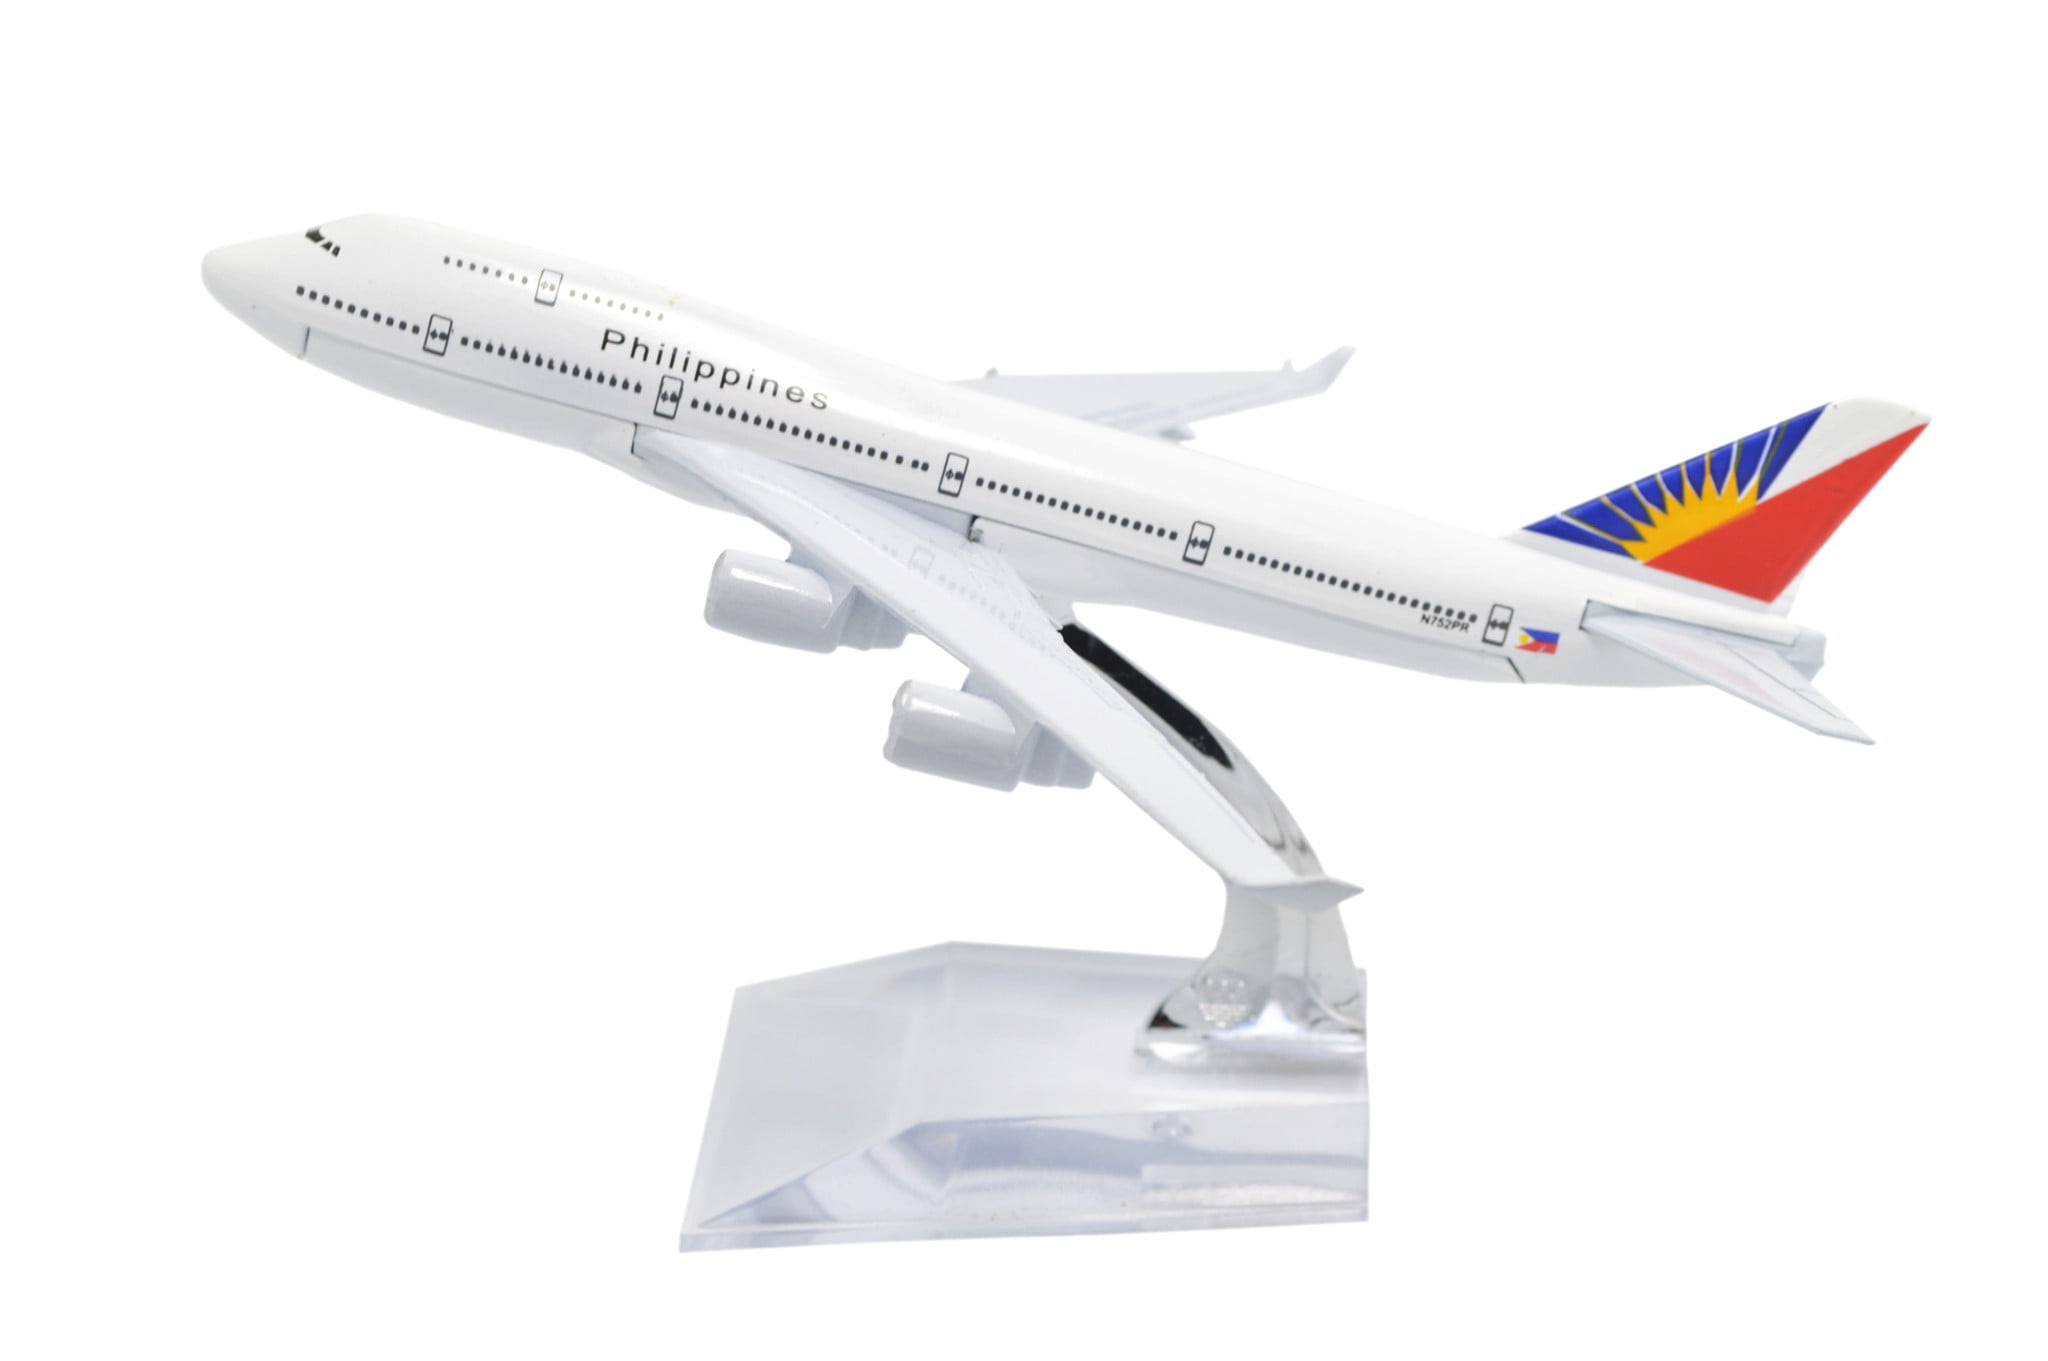 16cm AIRBUS JUMBO A380 PHILIPPINES AIRLINES AEROPLANE METAL PLANE MODEL TOY GIFT 